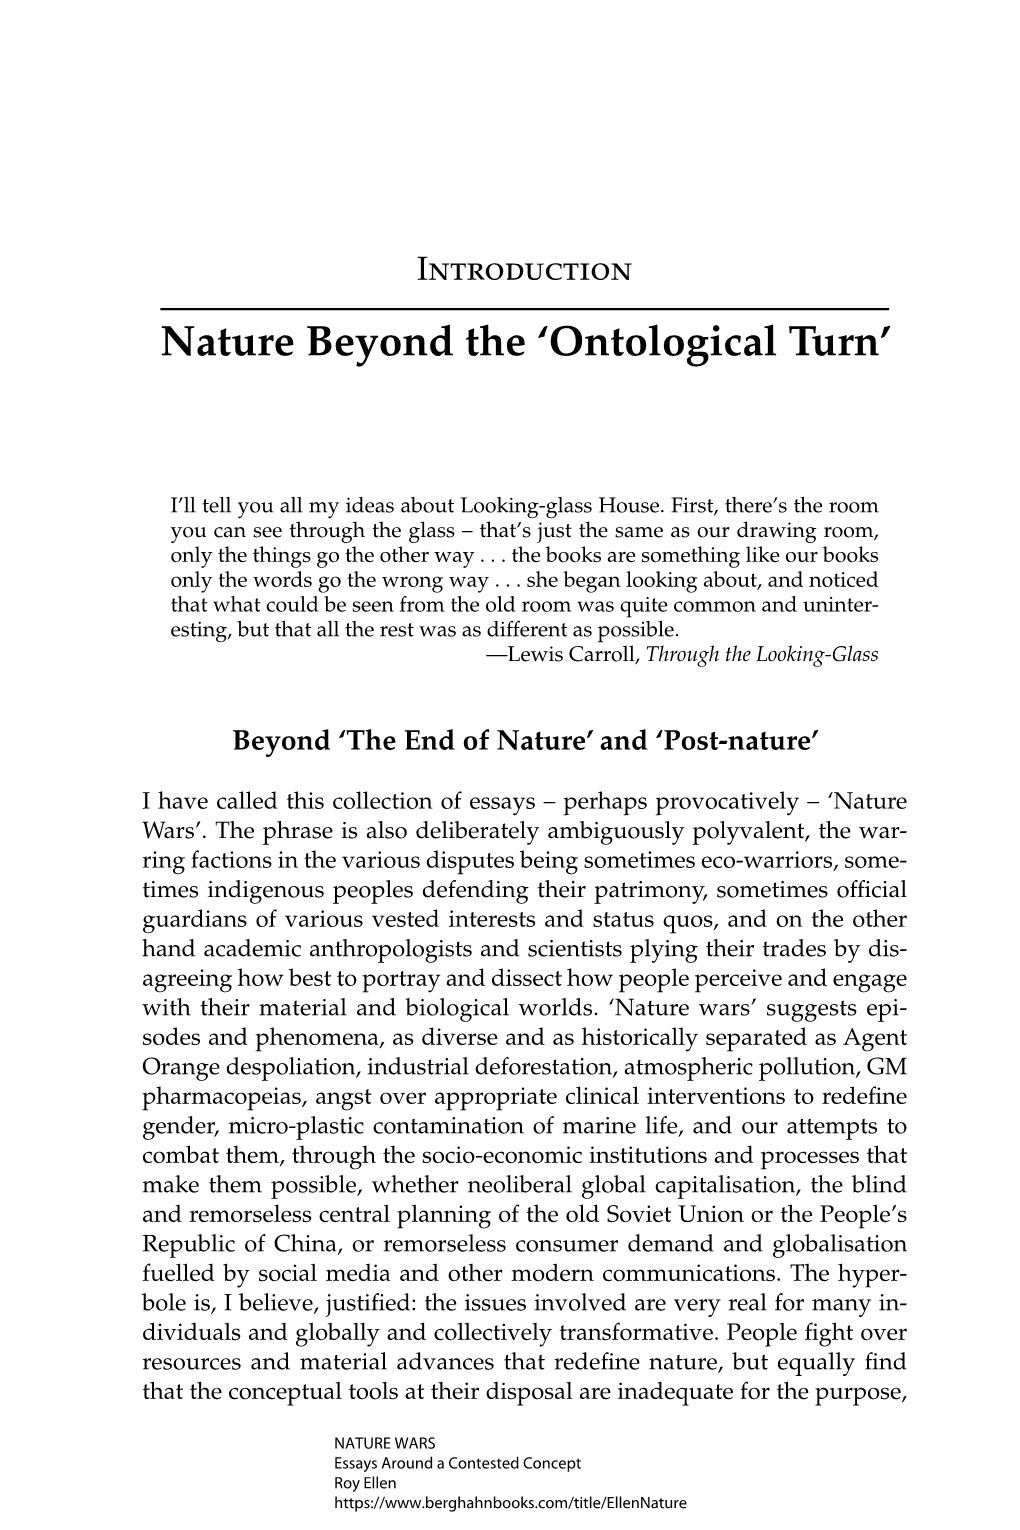 Nature Beyond the 'Ontological Turn'